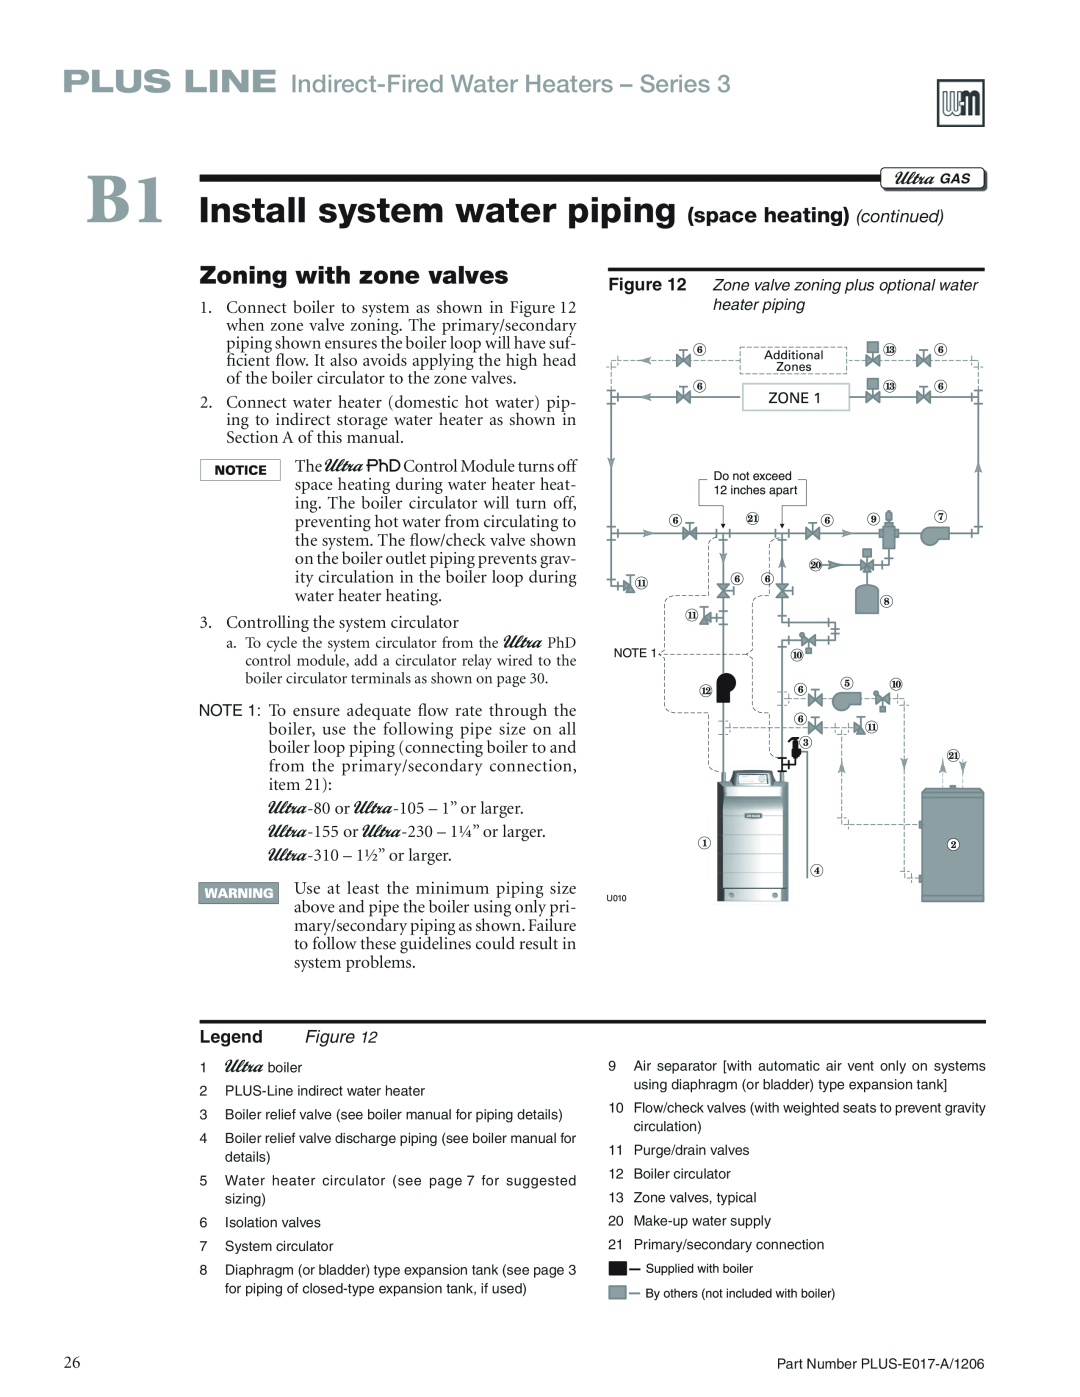 Weil-McLain PLUS-E017-A/1206 manual Zoning with zone valves, PLUS LINE Indirect-FiredWater Heaters - Series 